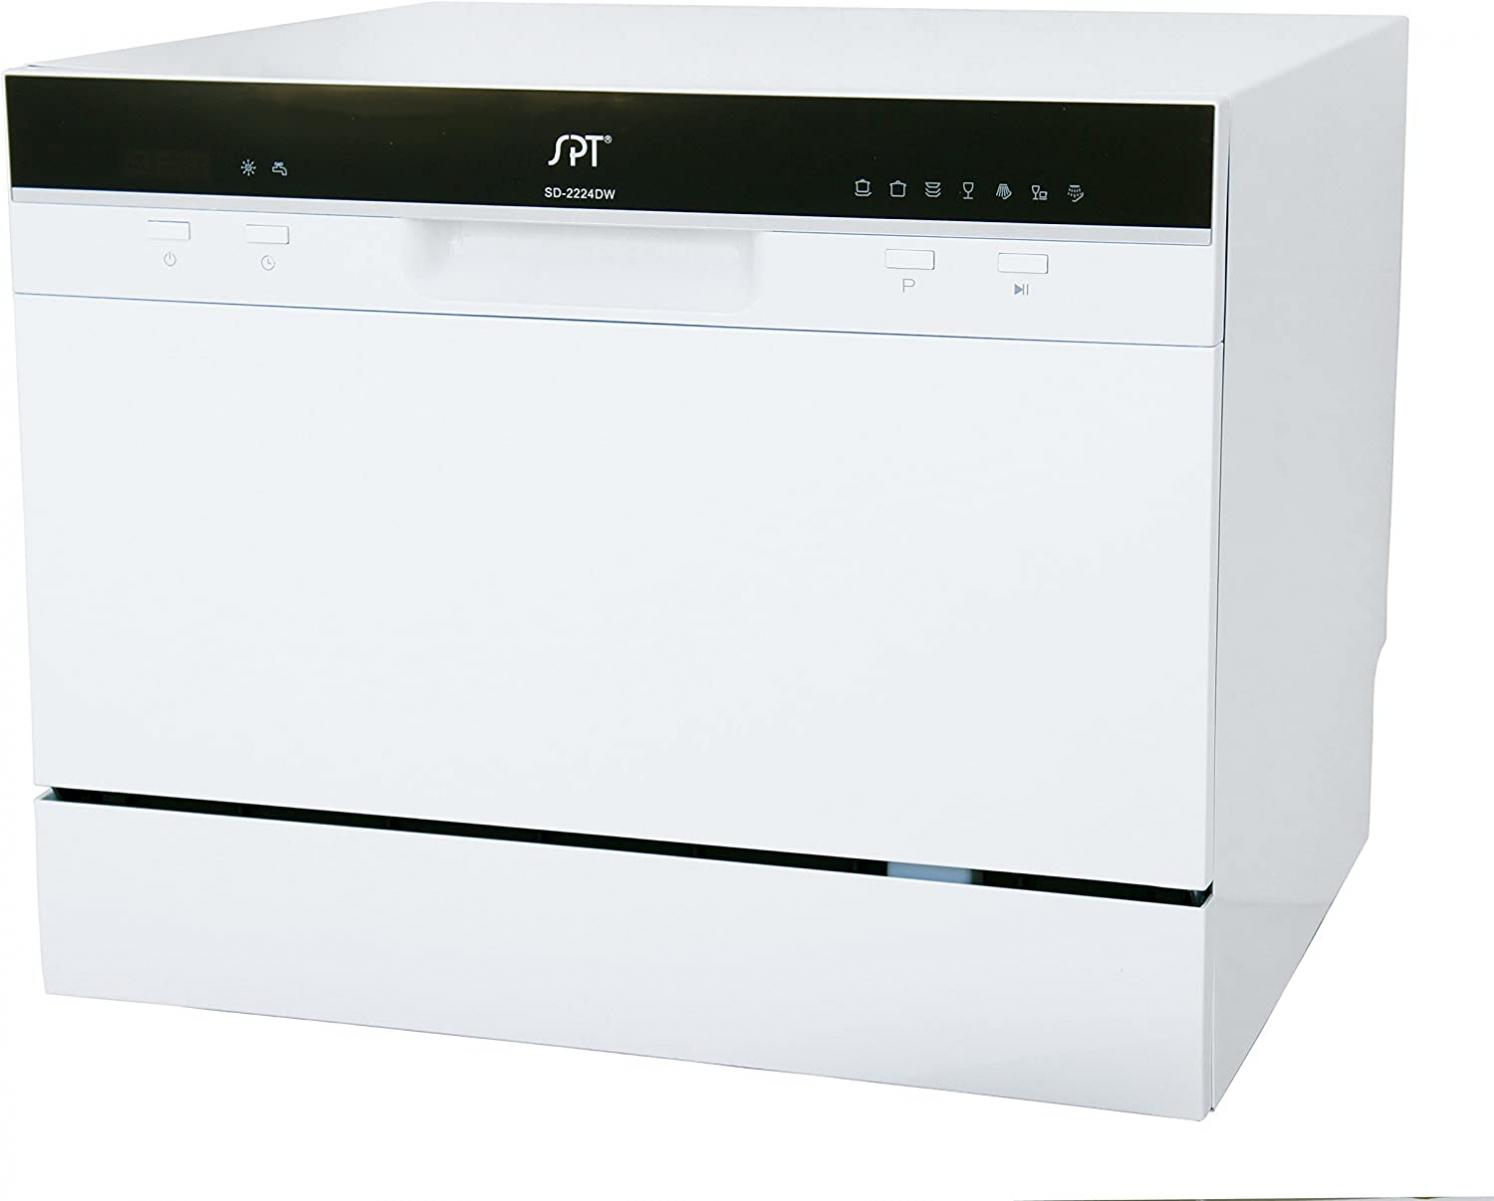 SPT SD-2224DWA Energy Star Countertop Dishwasher with Delay Start & LED – White